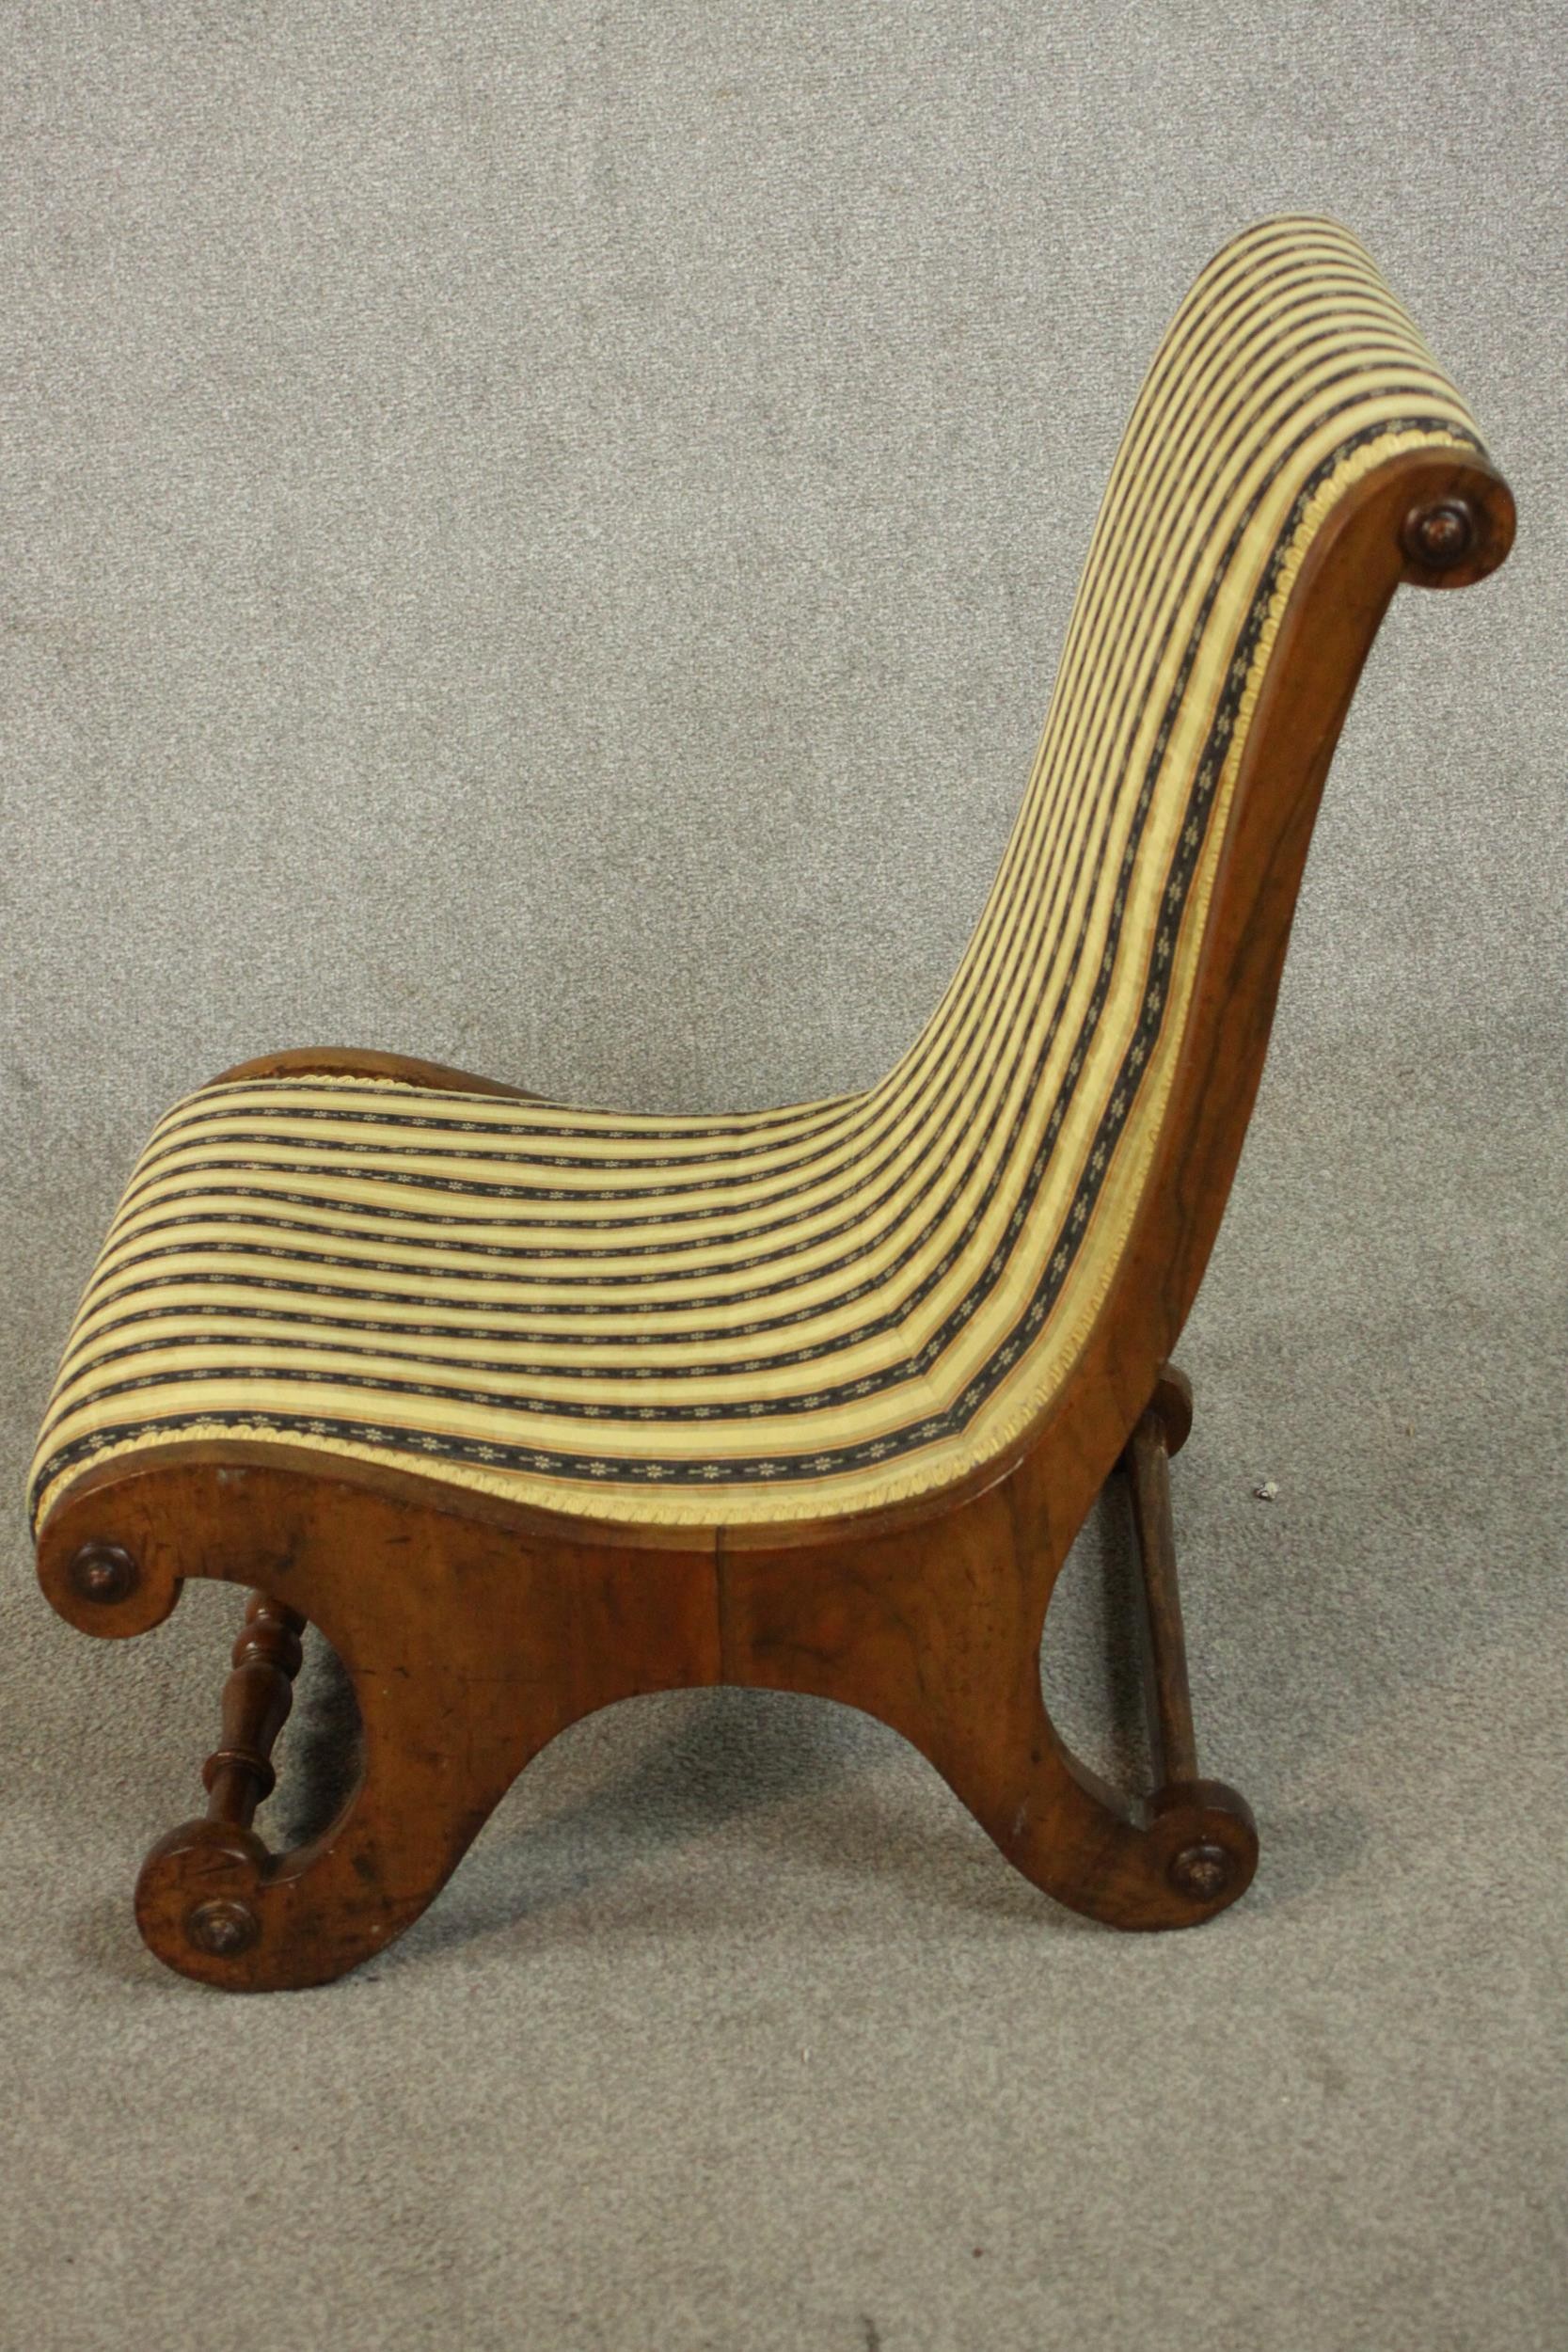 Two similar Victorian walnut slipper chairs, with striped upholstery, one with open arms, on - Image 12 of 21